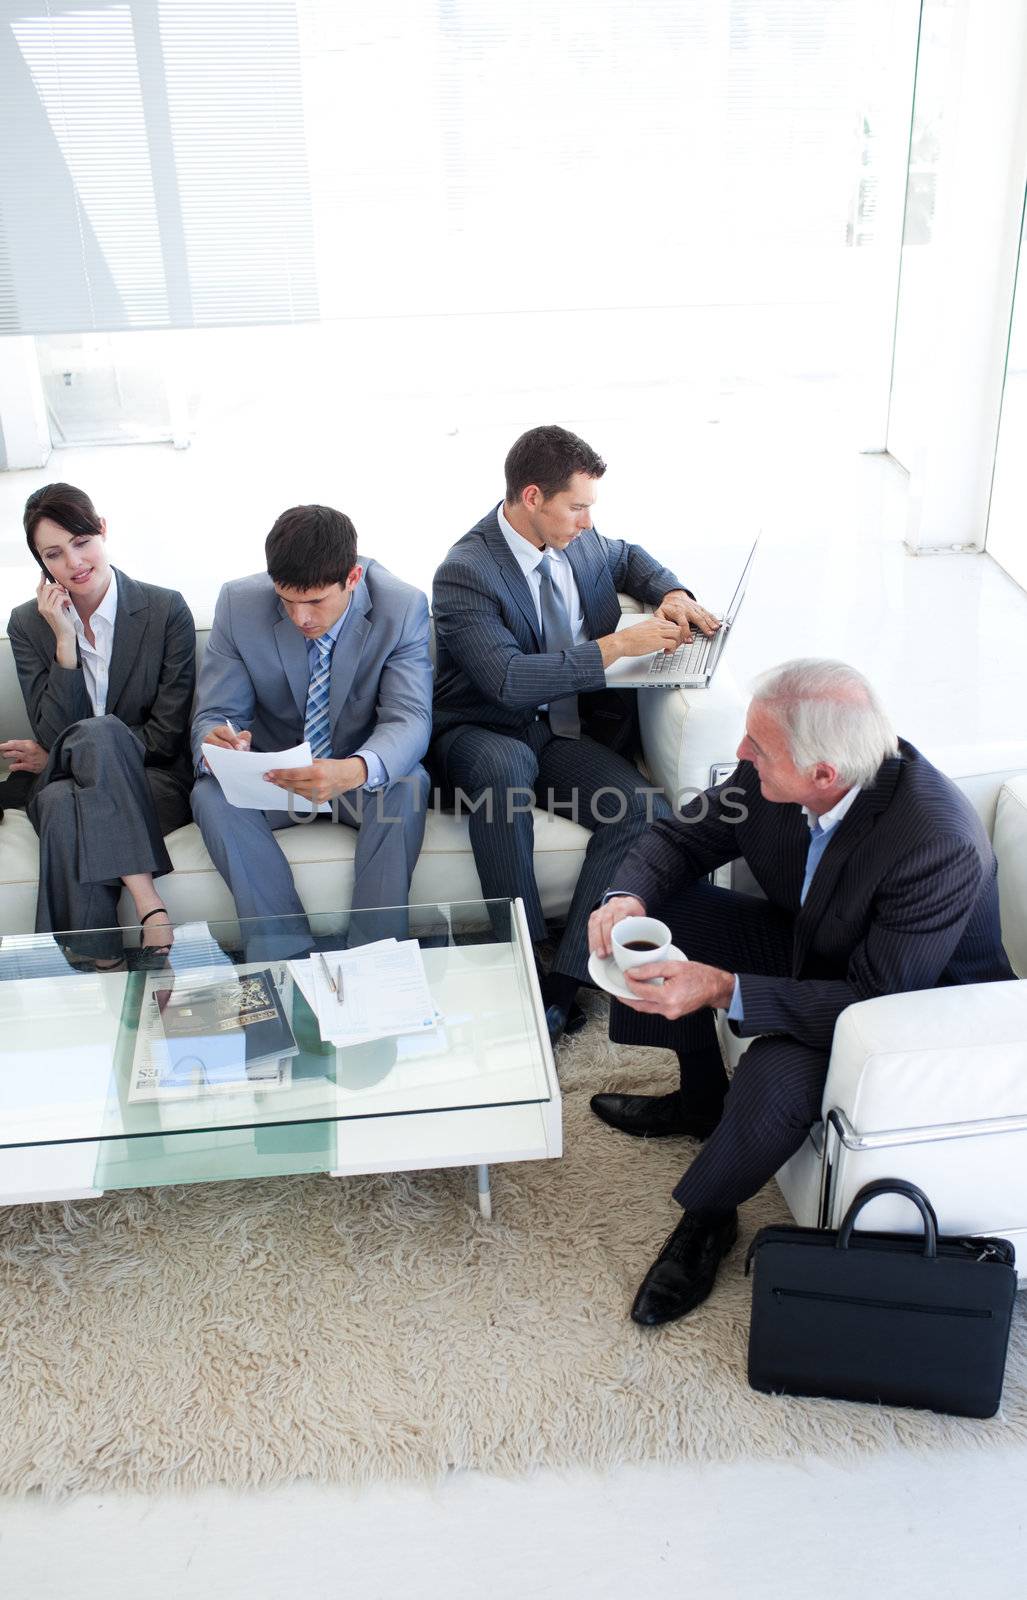 International Business people sitting and waiting for a job inte by Wavebreakmedia